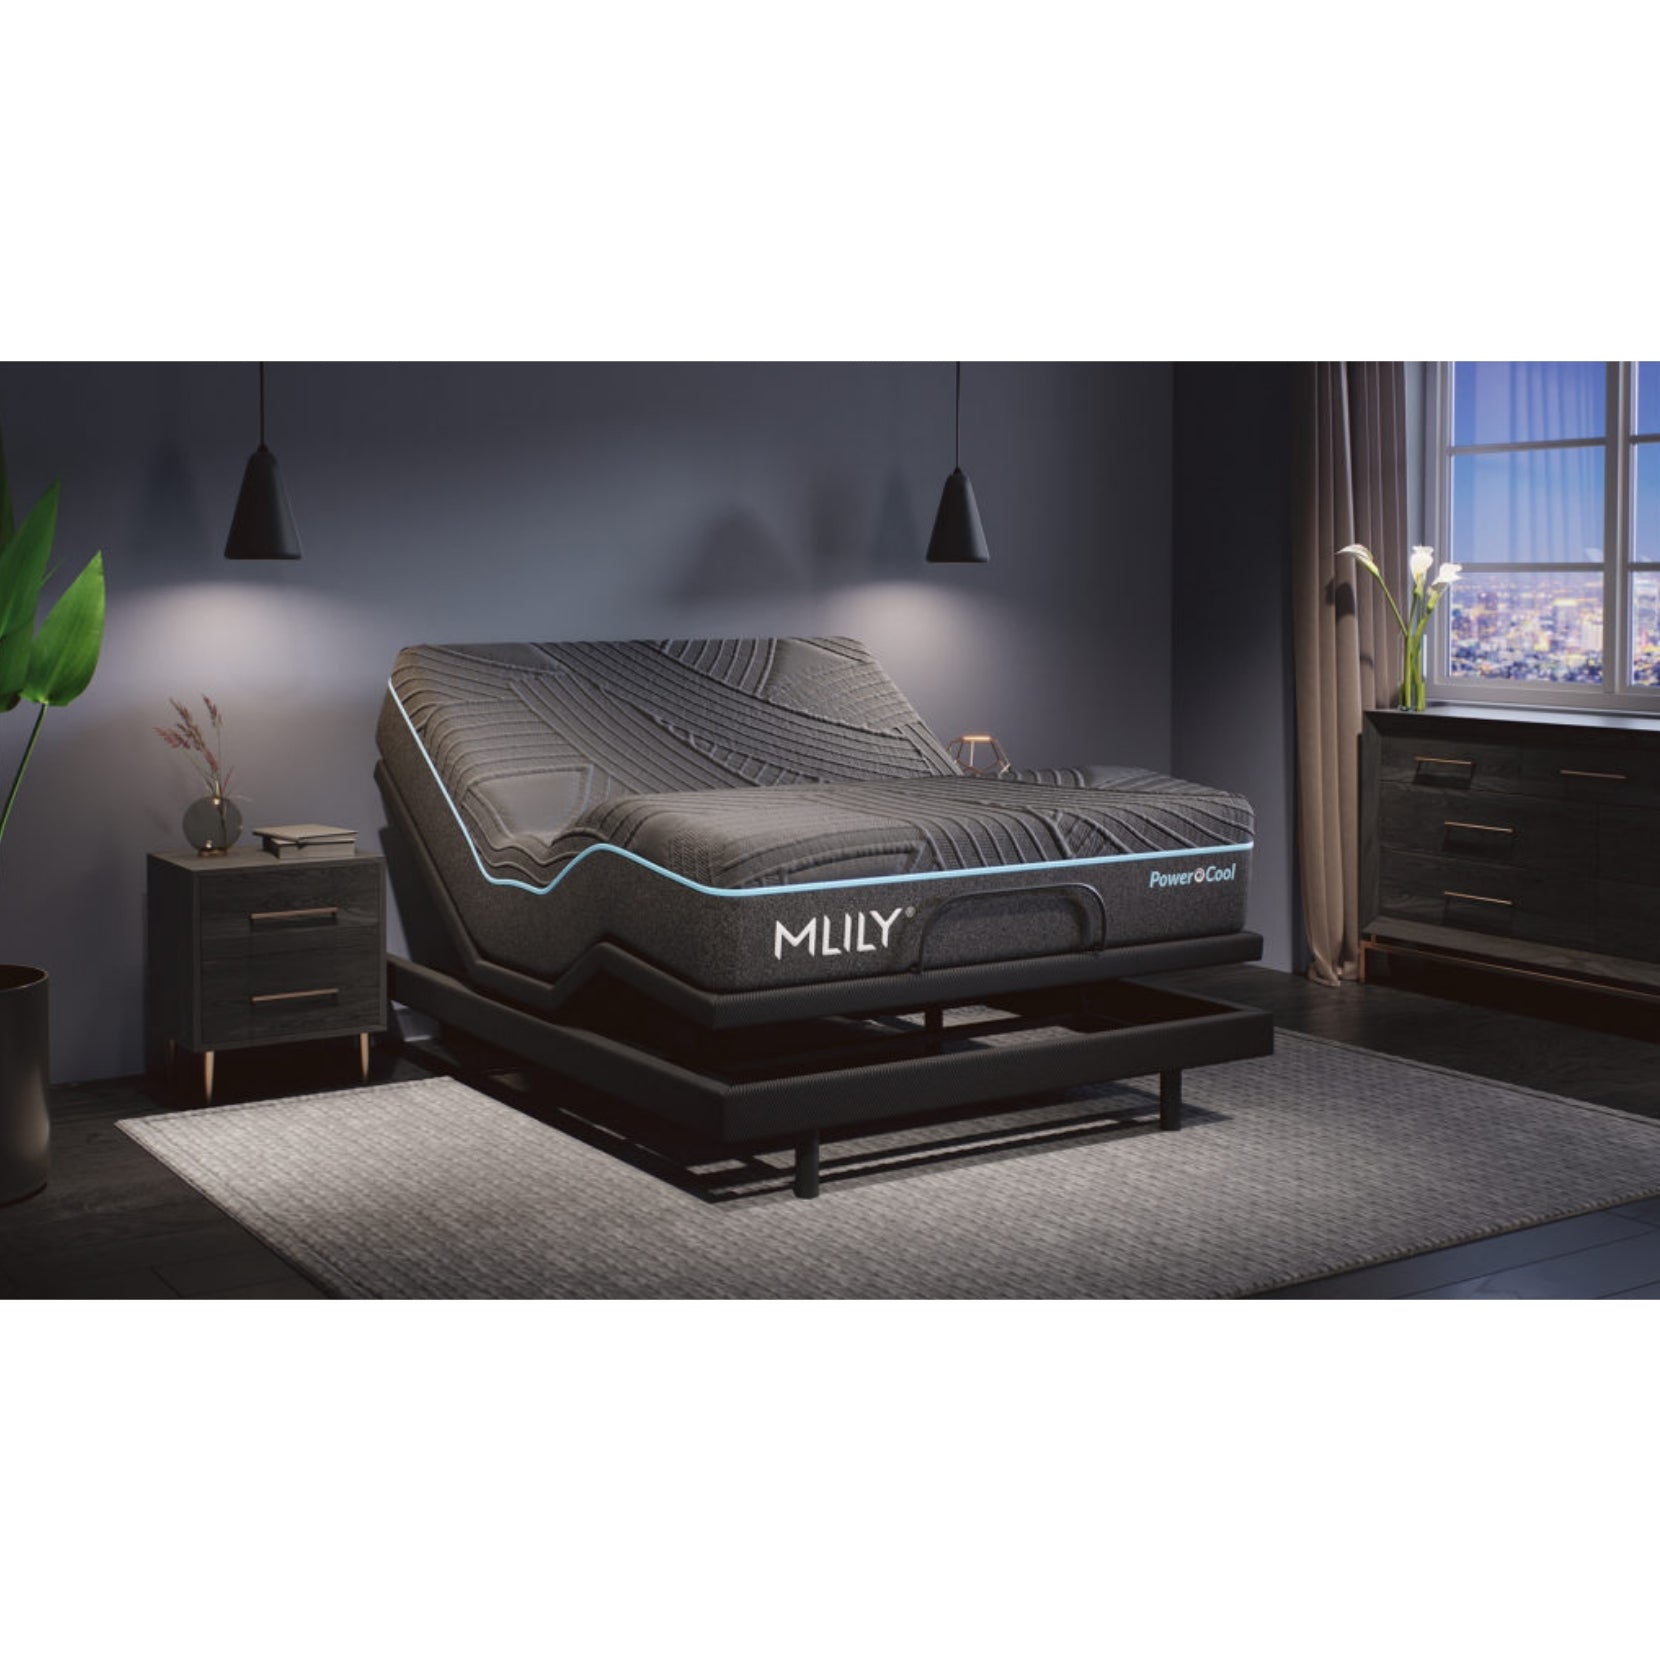 Firm PowerCool 11.5" Hybrid Mattress With Ventilated Memory Foam Pillow(s) And Adjustable Base Featuring Integrated Cooling Fans Inside Of A Bedroom With Head And Foot Completely Raised, Corner View